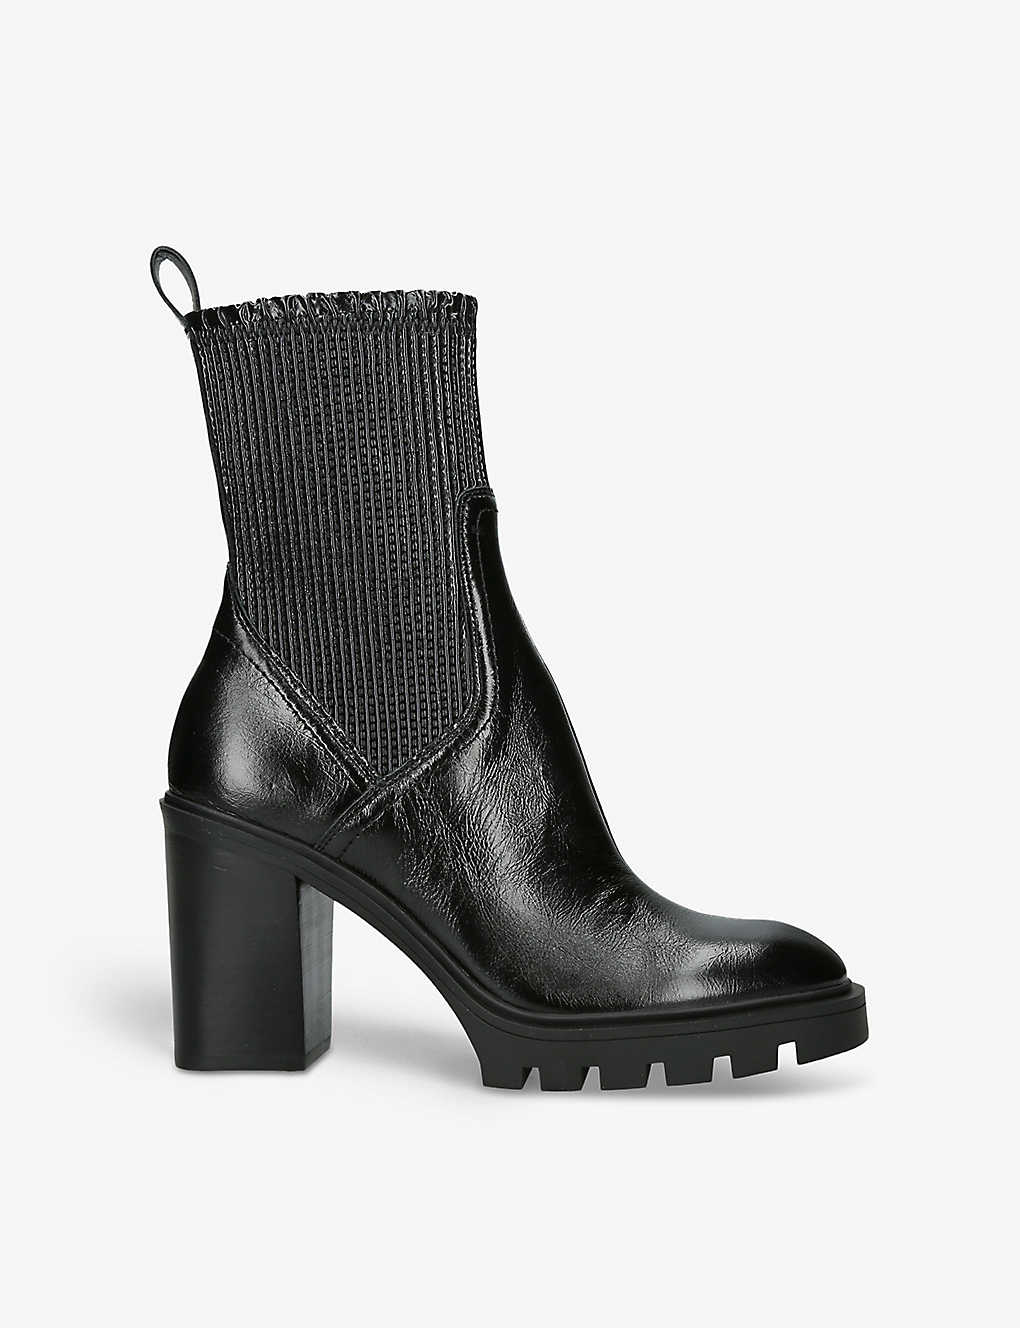 Dolce Vita Womens Black Marni H2o Crinkled Patent-leather Heeled Ankle Boots